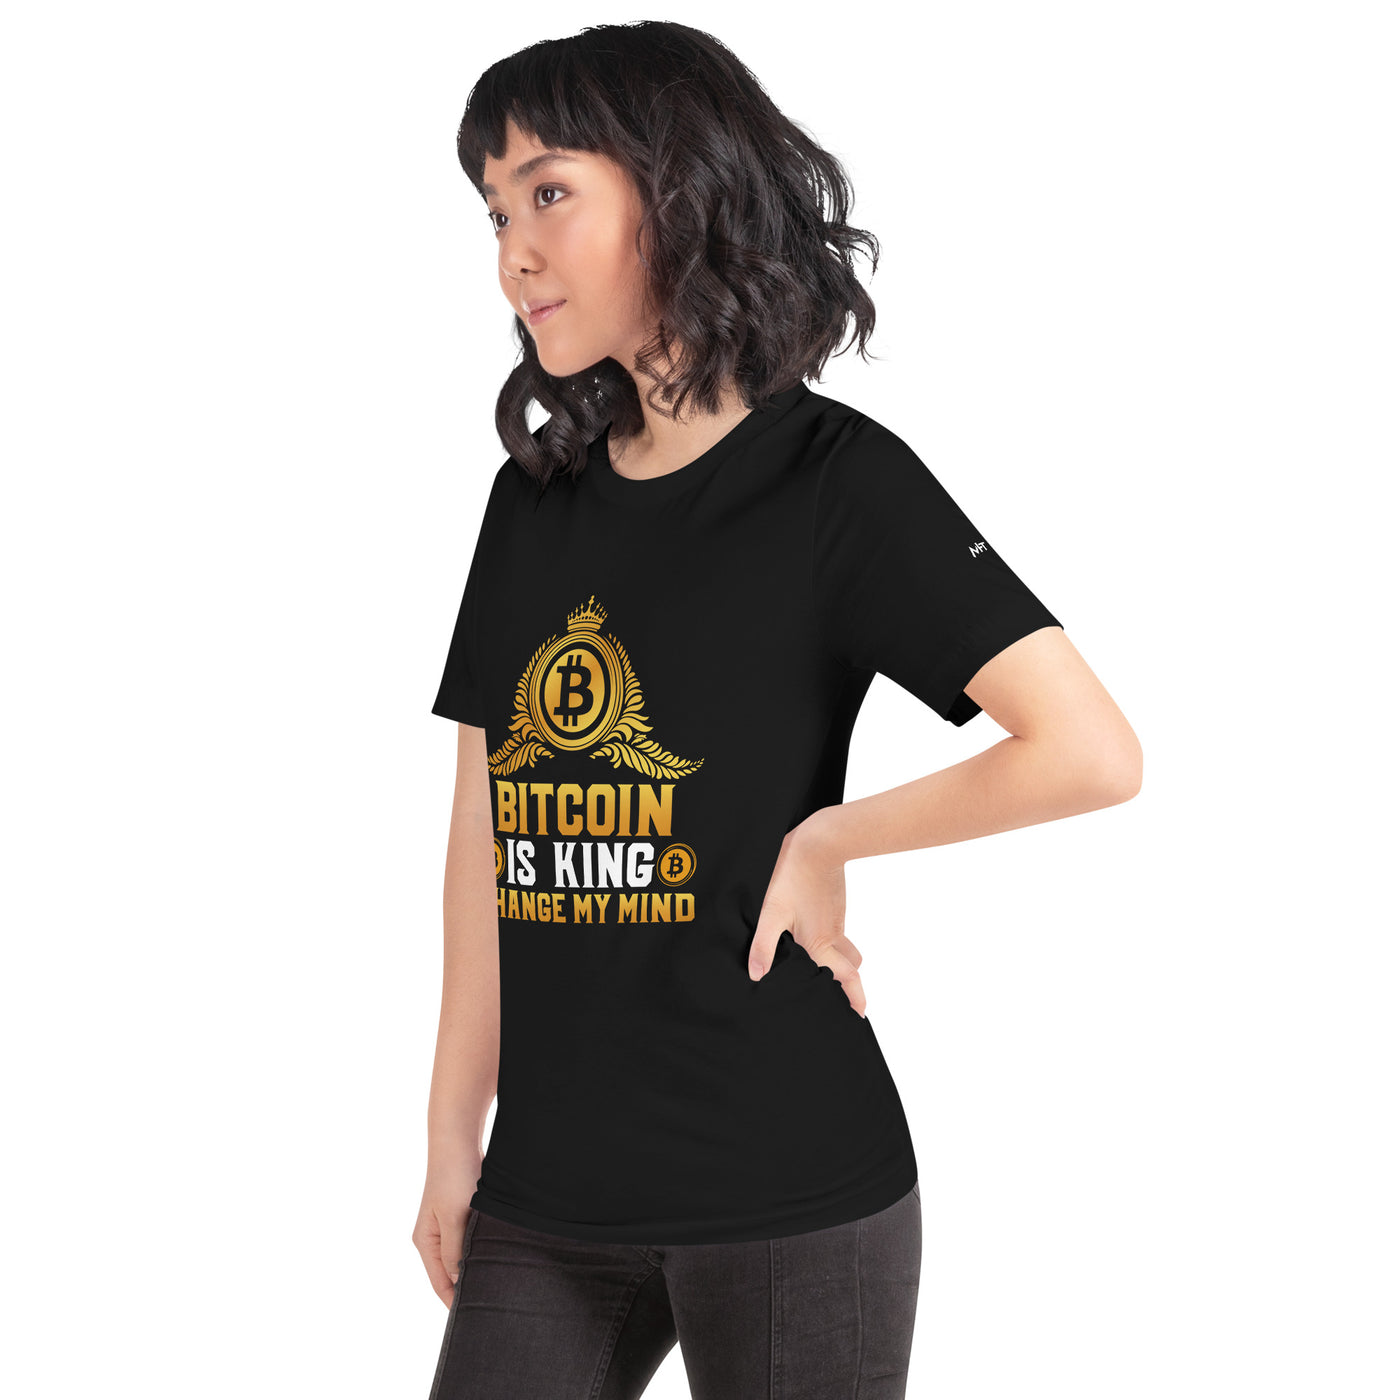 Bitcoin is King: Change my Mind - Unisex t-shirt